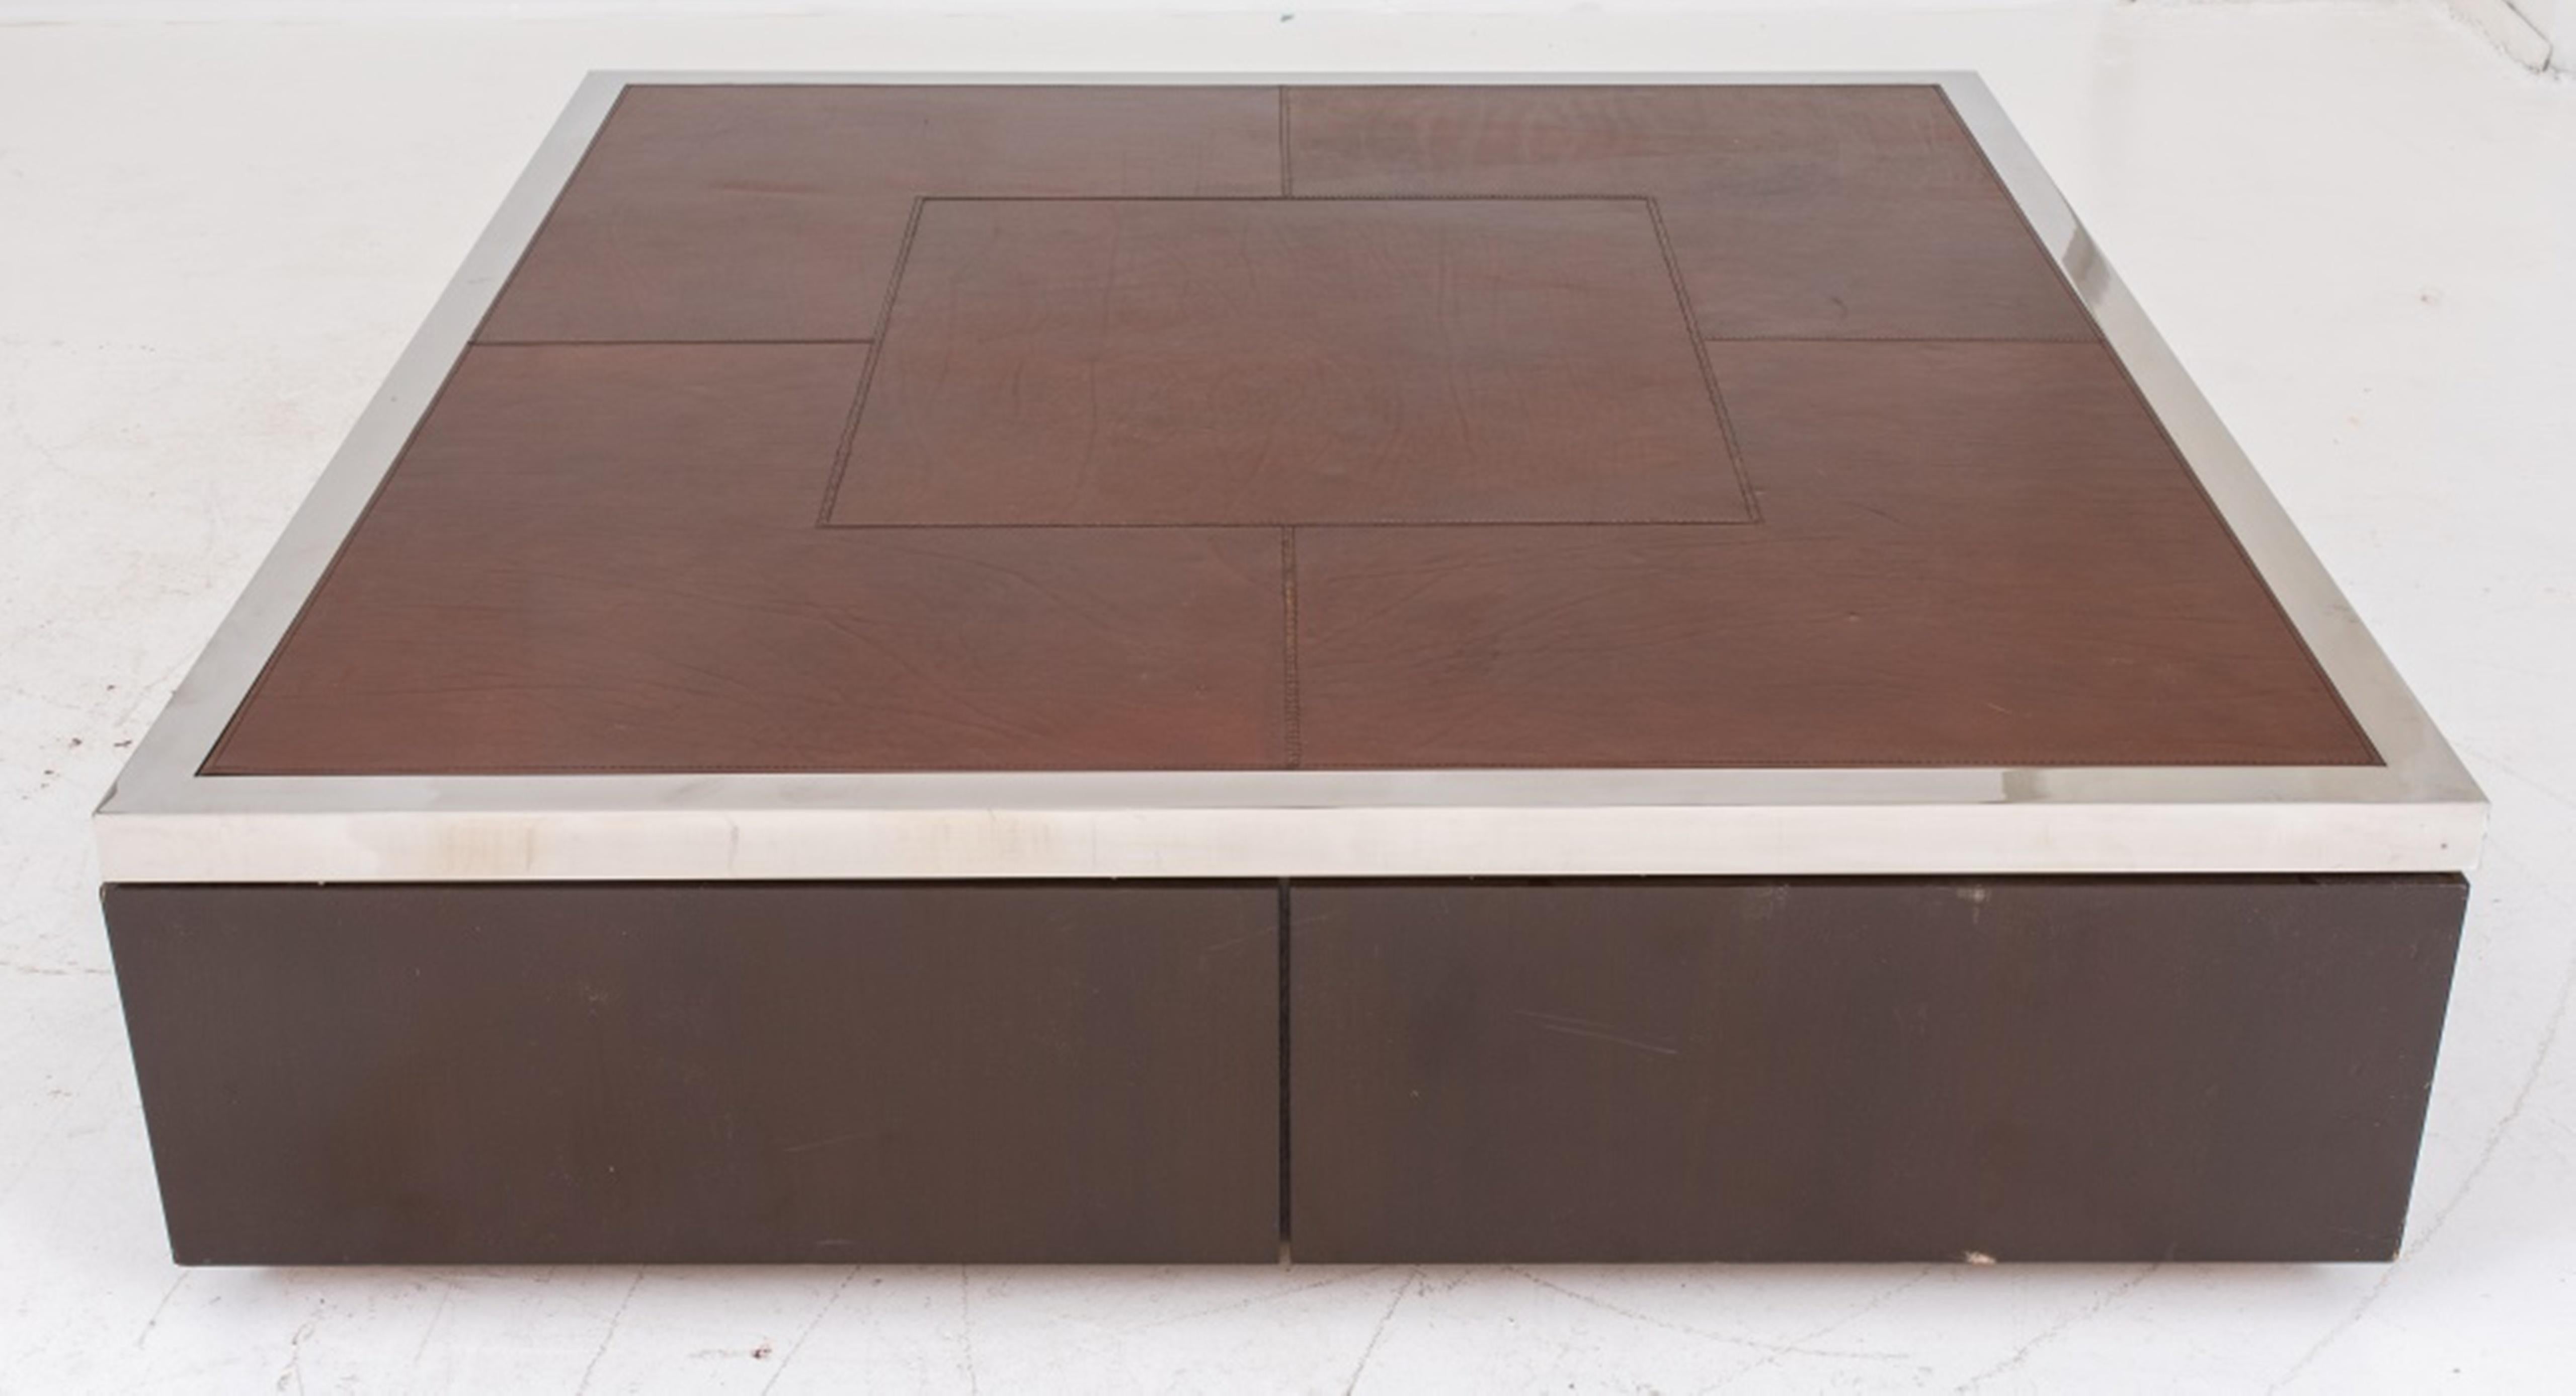 Monumental minimalist custom built leather, chrome, and wood coffee table, with leather face, metal rim, and drawers beneath for storage.

Dealer: S138XX.